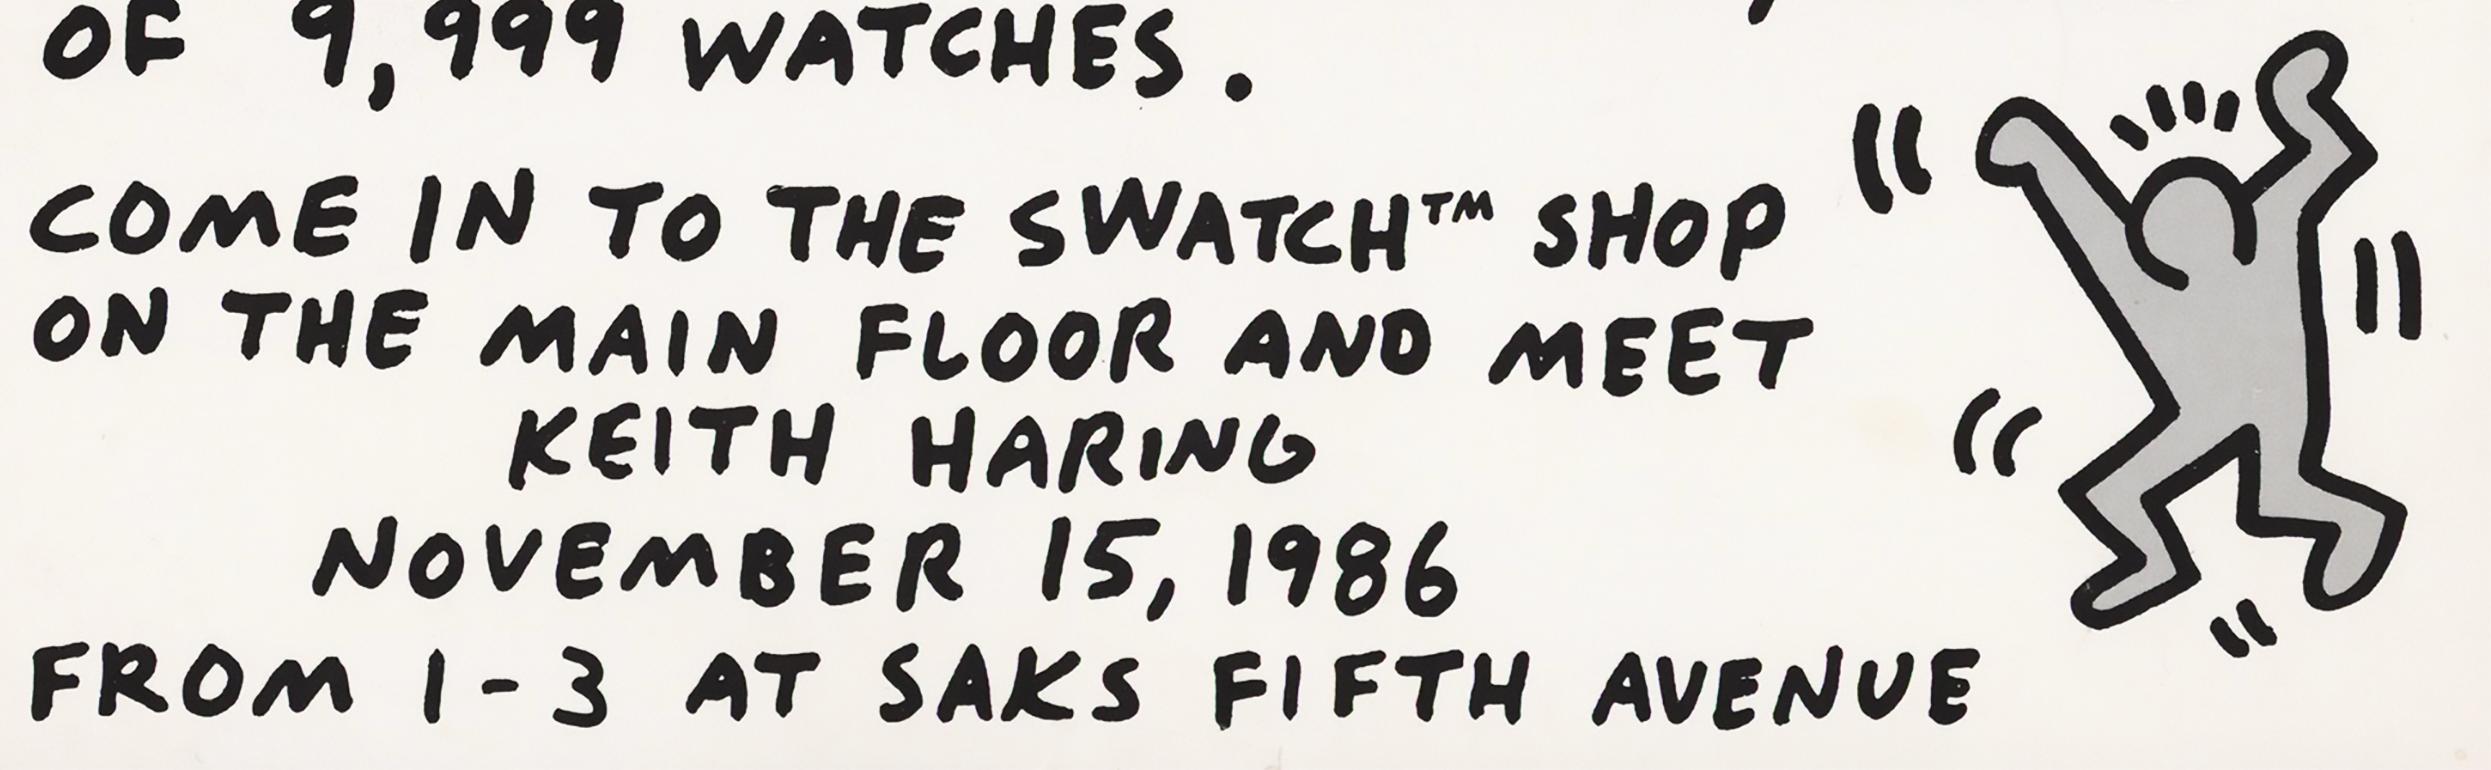 Keith Haring Swatch Watches 1986:
Rare vintage original 1980s Keith Haring illustrated poster for Swatch Watches & Saks Fifth Ave. 

Offset lithograph. 7x10 inches. 
Minor age related wear; in otherwise good overall vintage condition.
Unsigned from